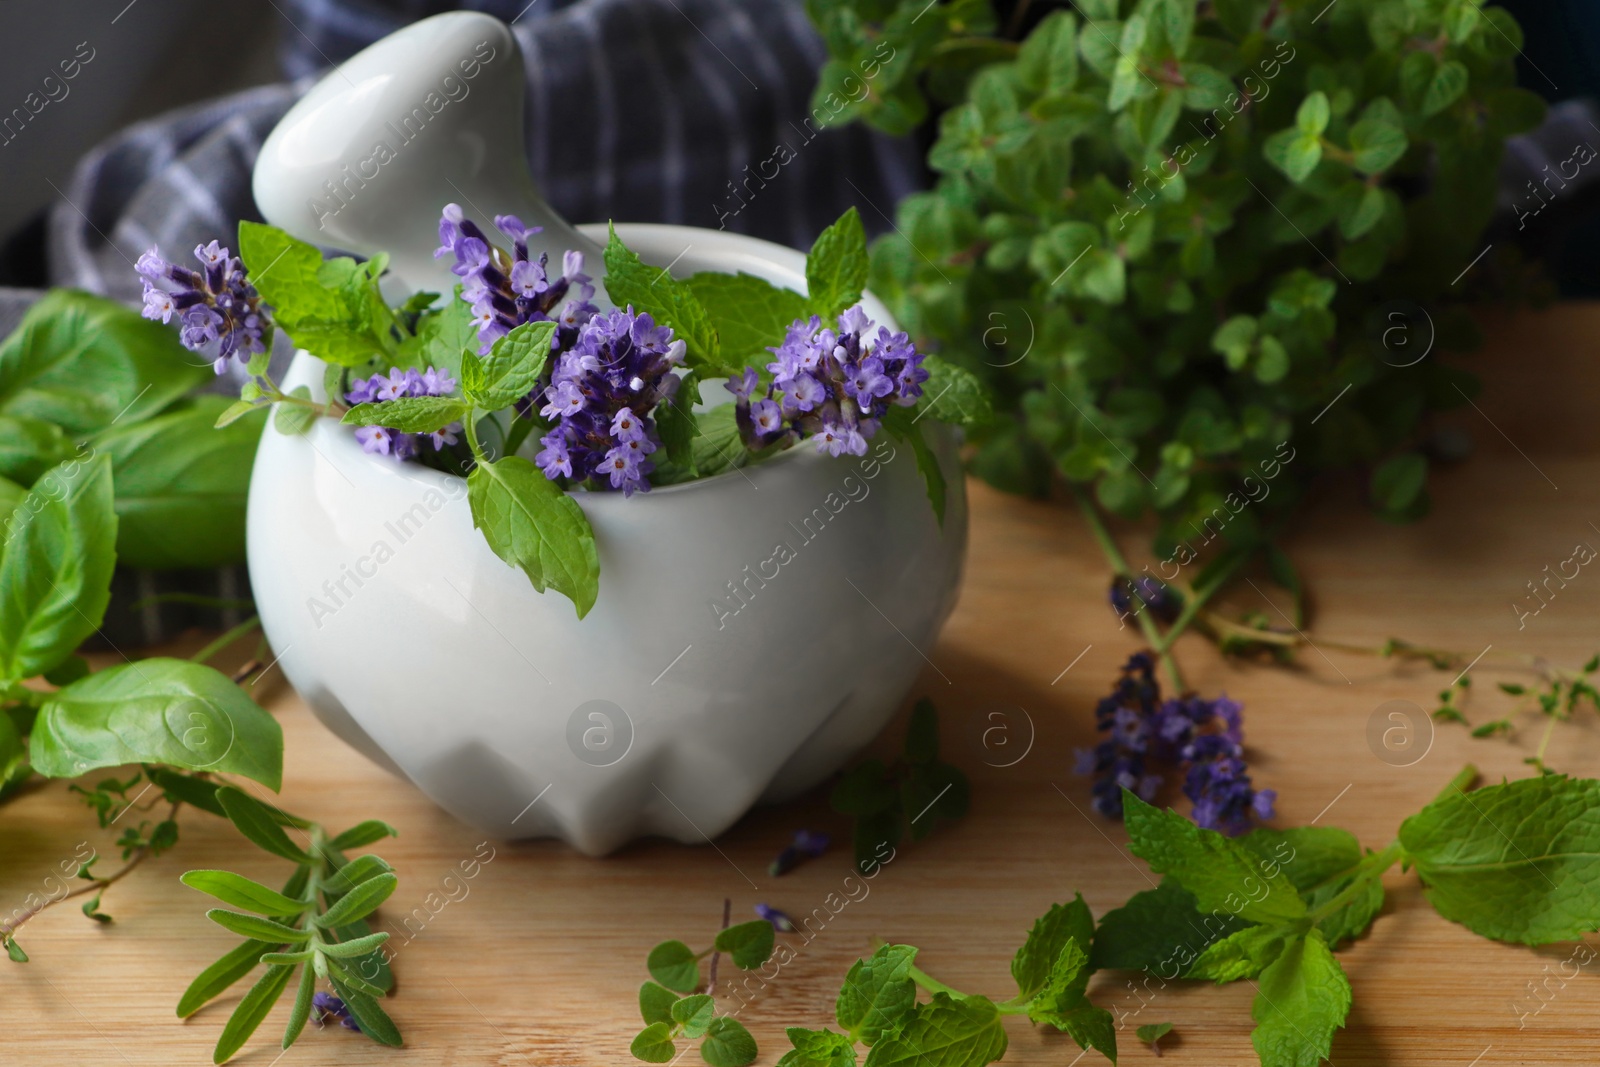 Photo of Mortar with fresh lavender flowers, mint and pestle on wooden table